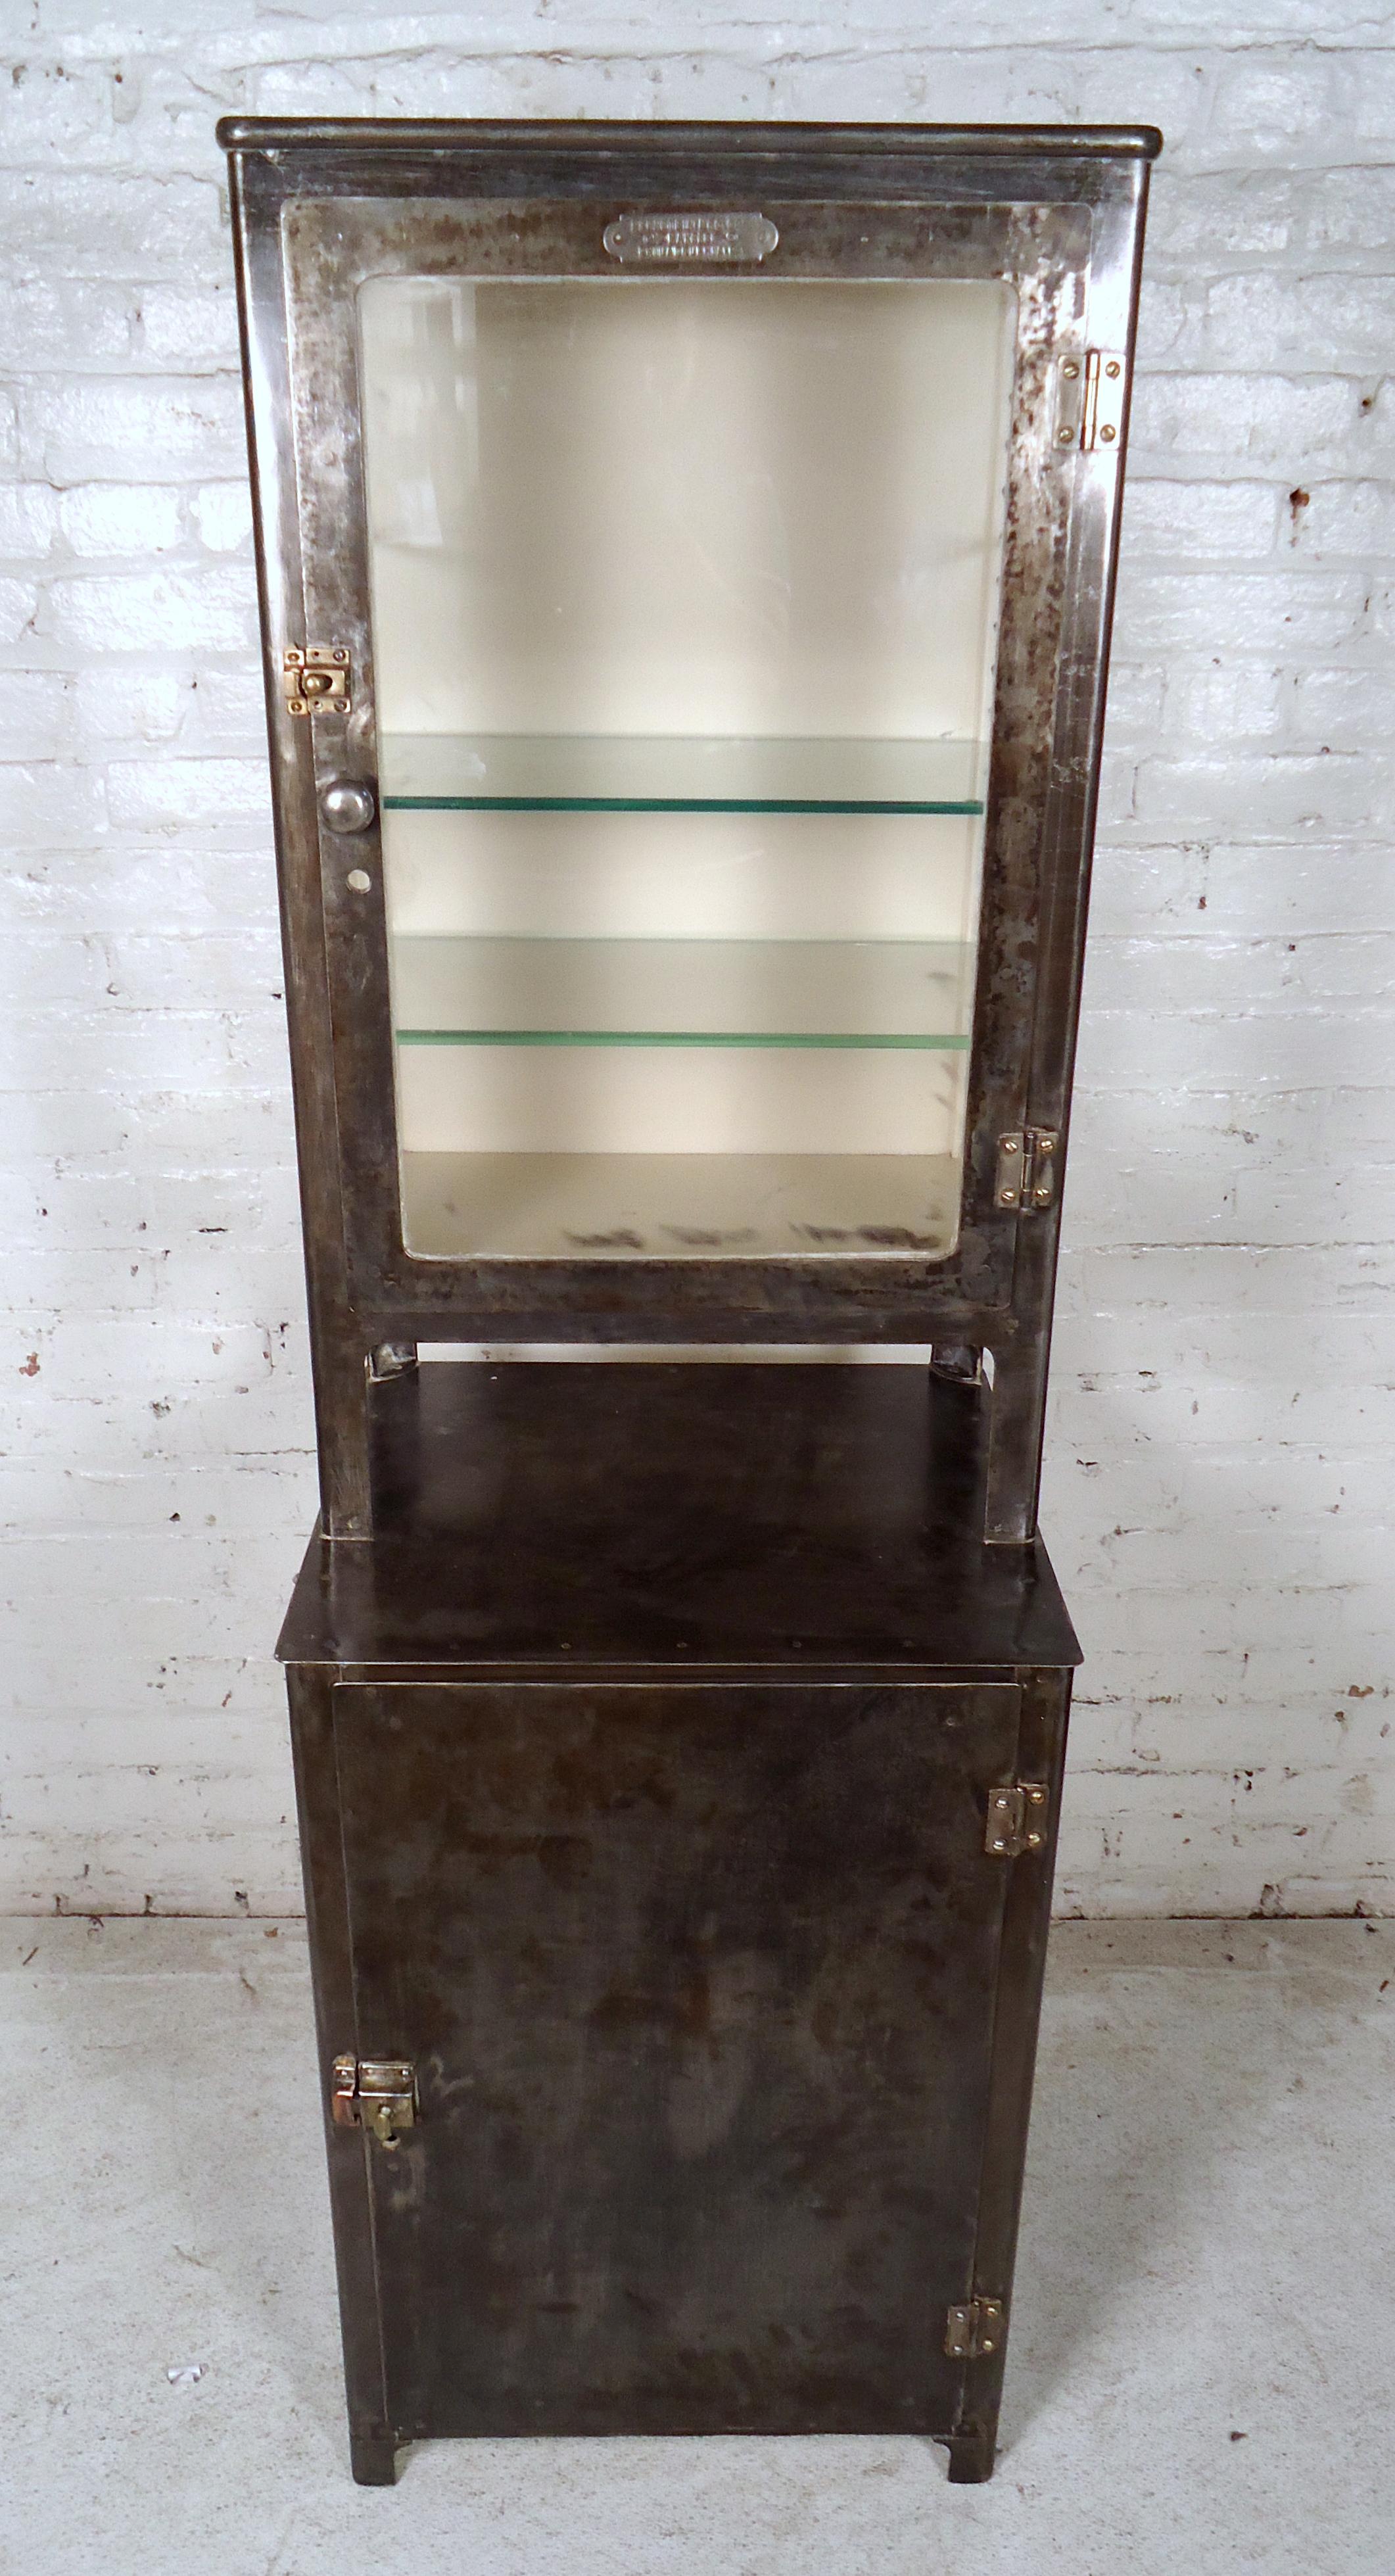 Antique industrial dental cabinet refinished in a bare metal style finish. Great modern storage or display case.

(Please confirm item location - NY or NJ - with dealer).